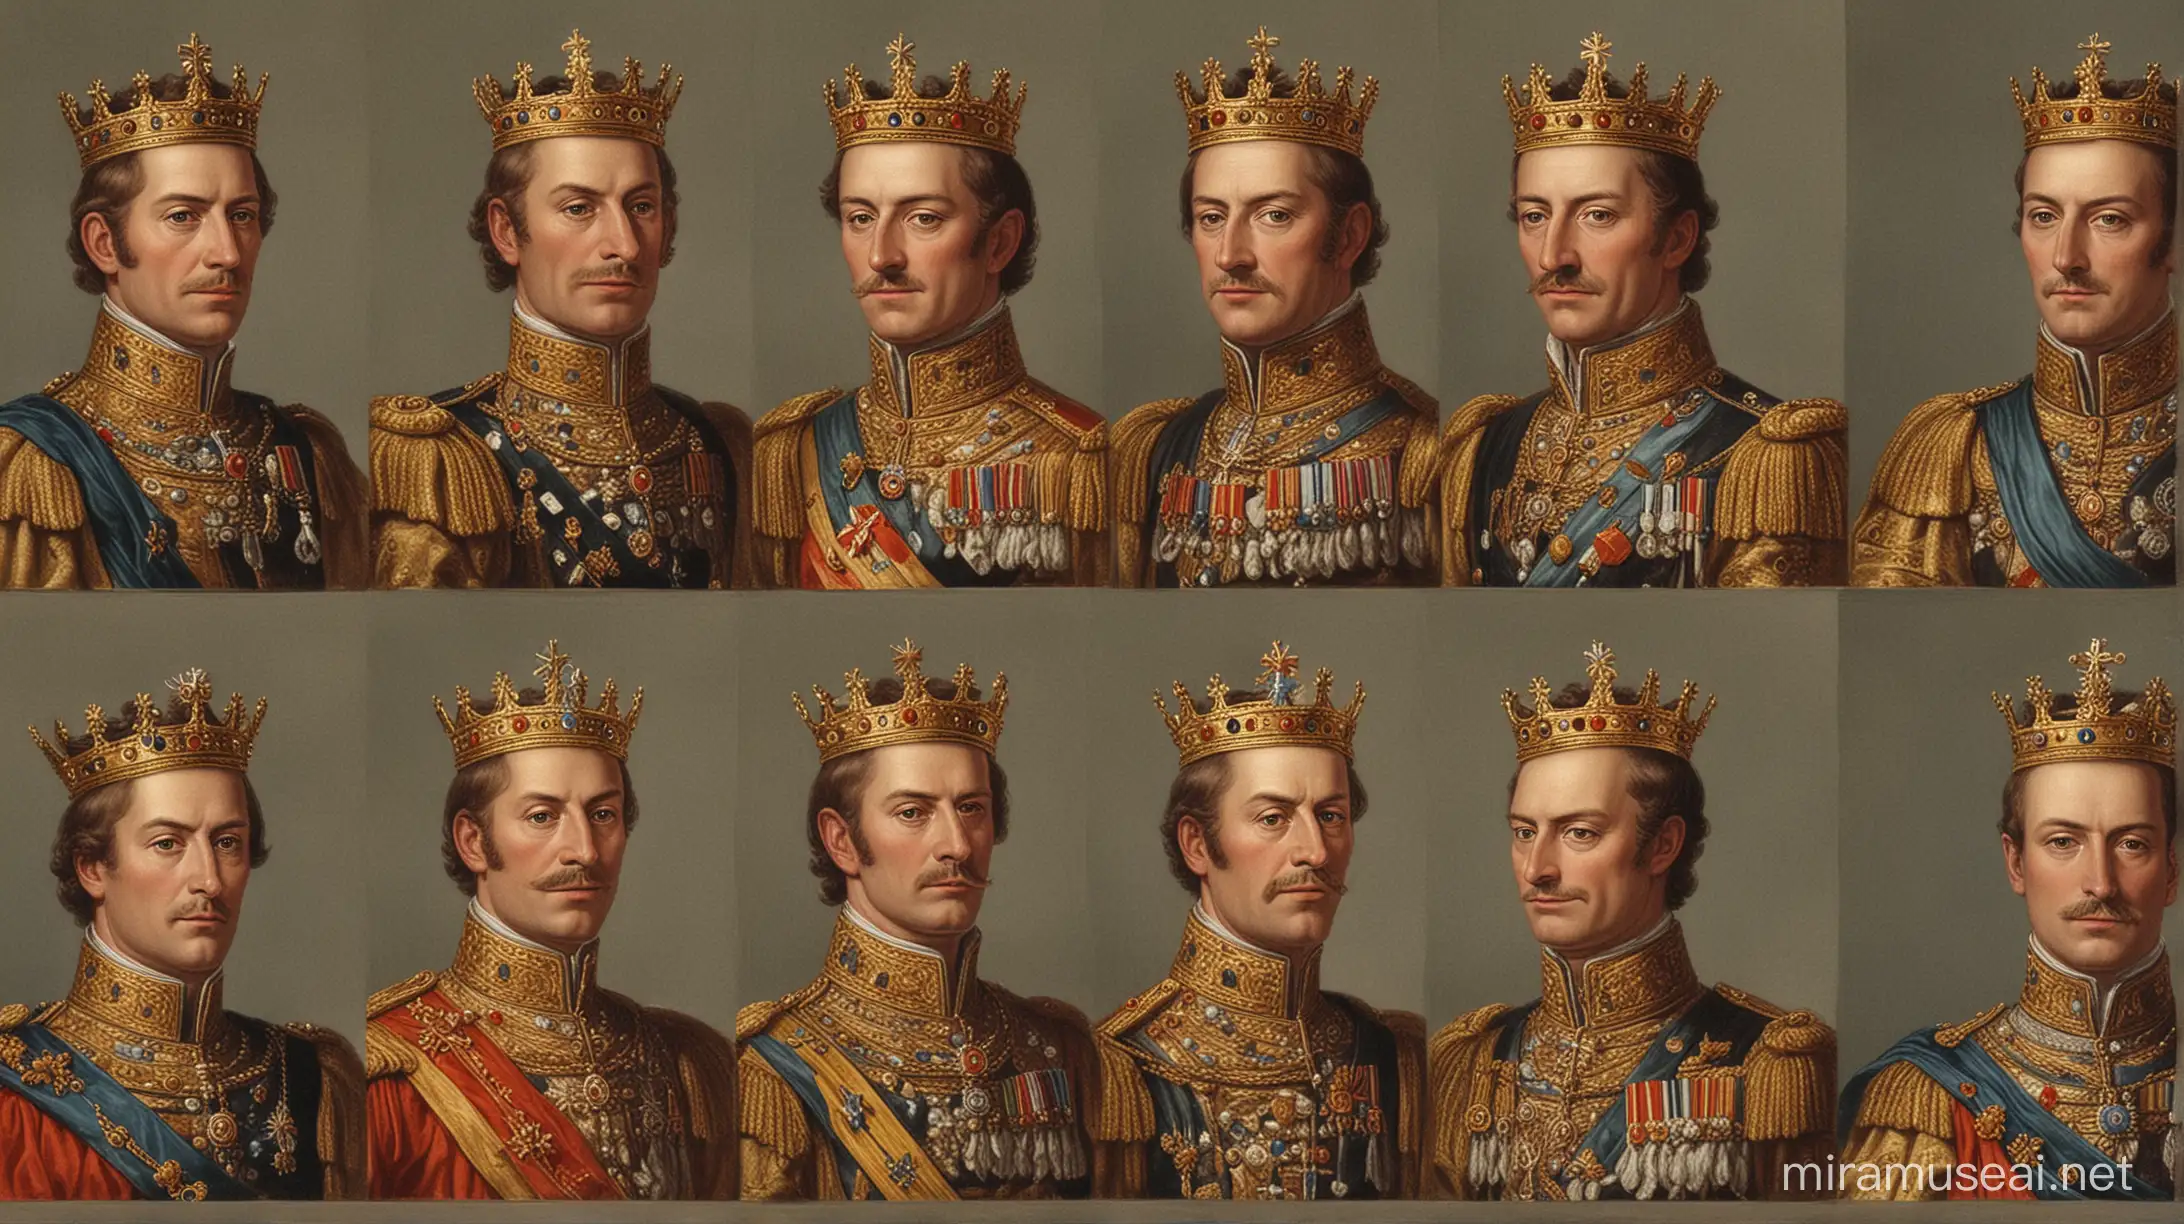 Unified Rulers under the German Emperor A Historical Representation